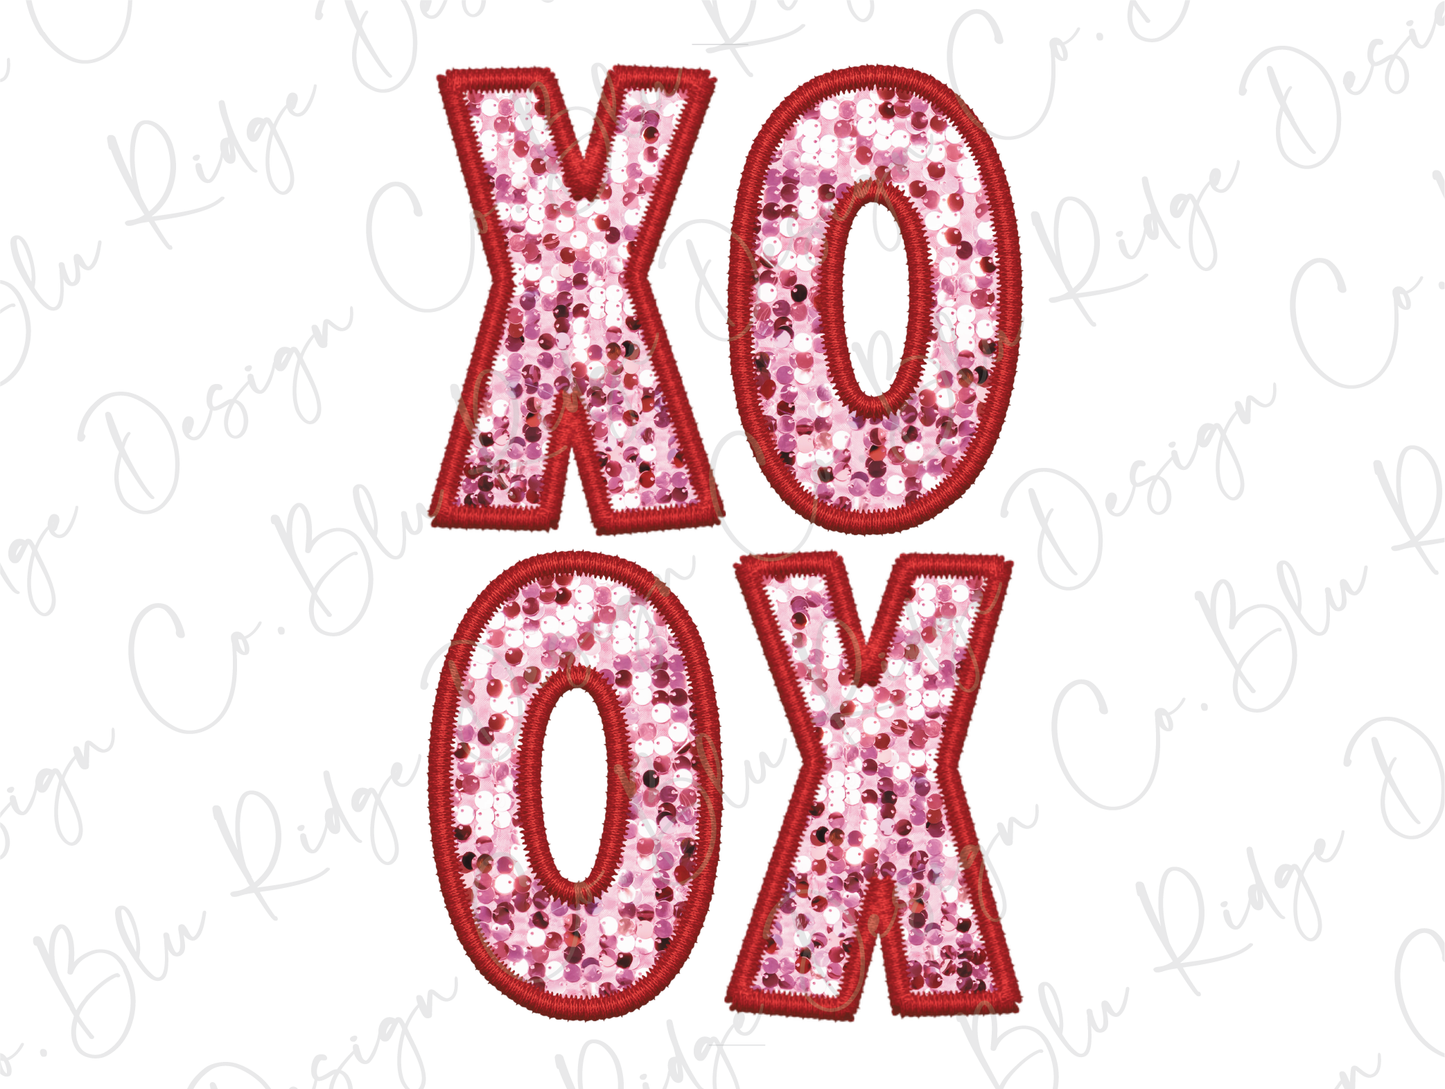 the word xoxo is made out of sequins